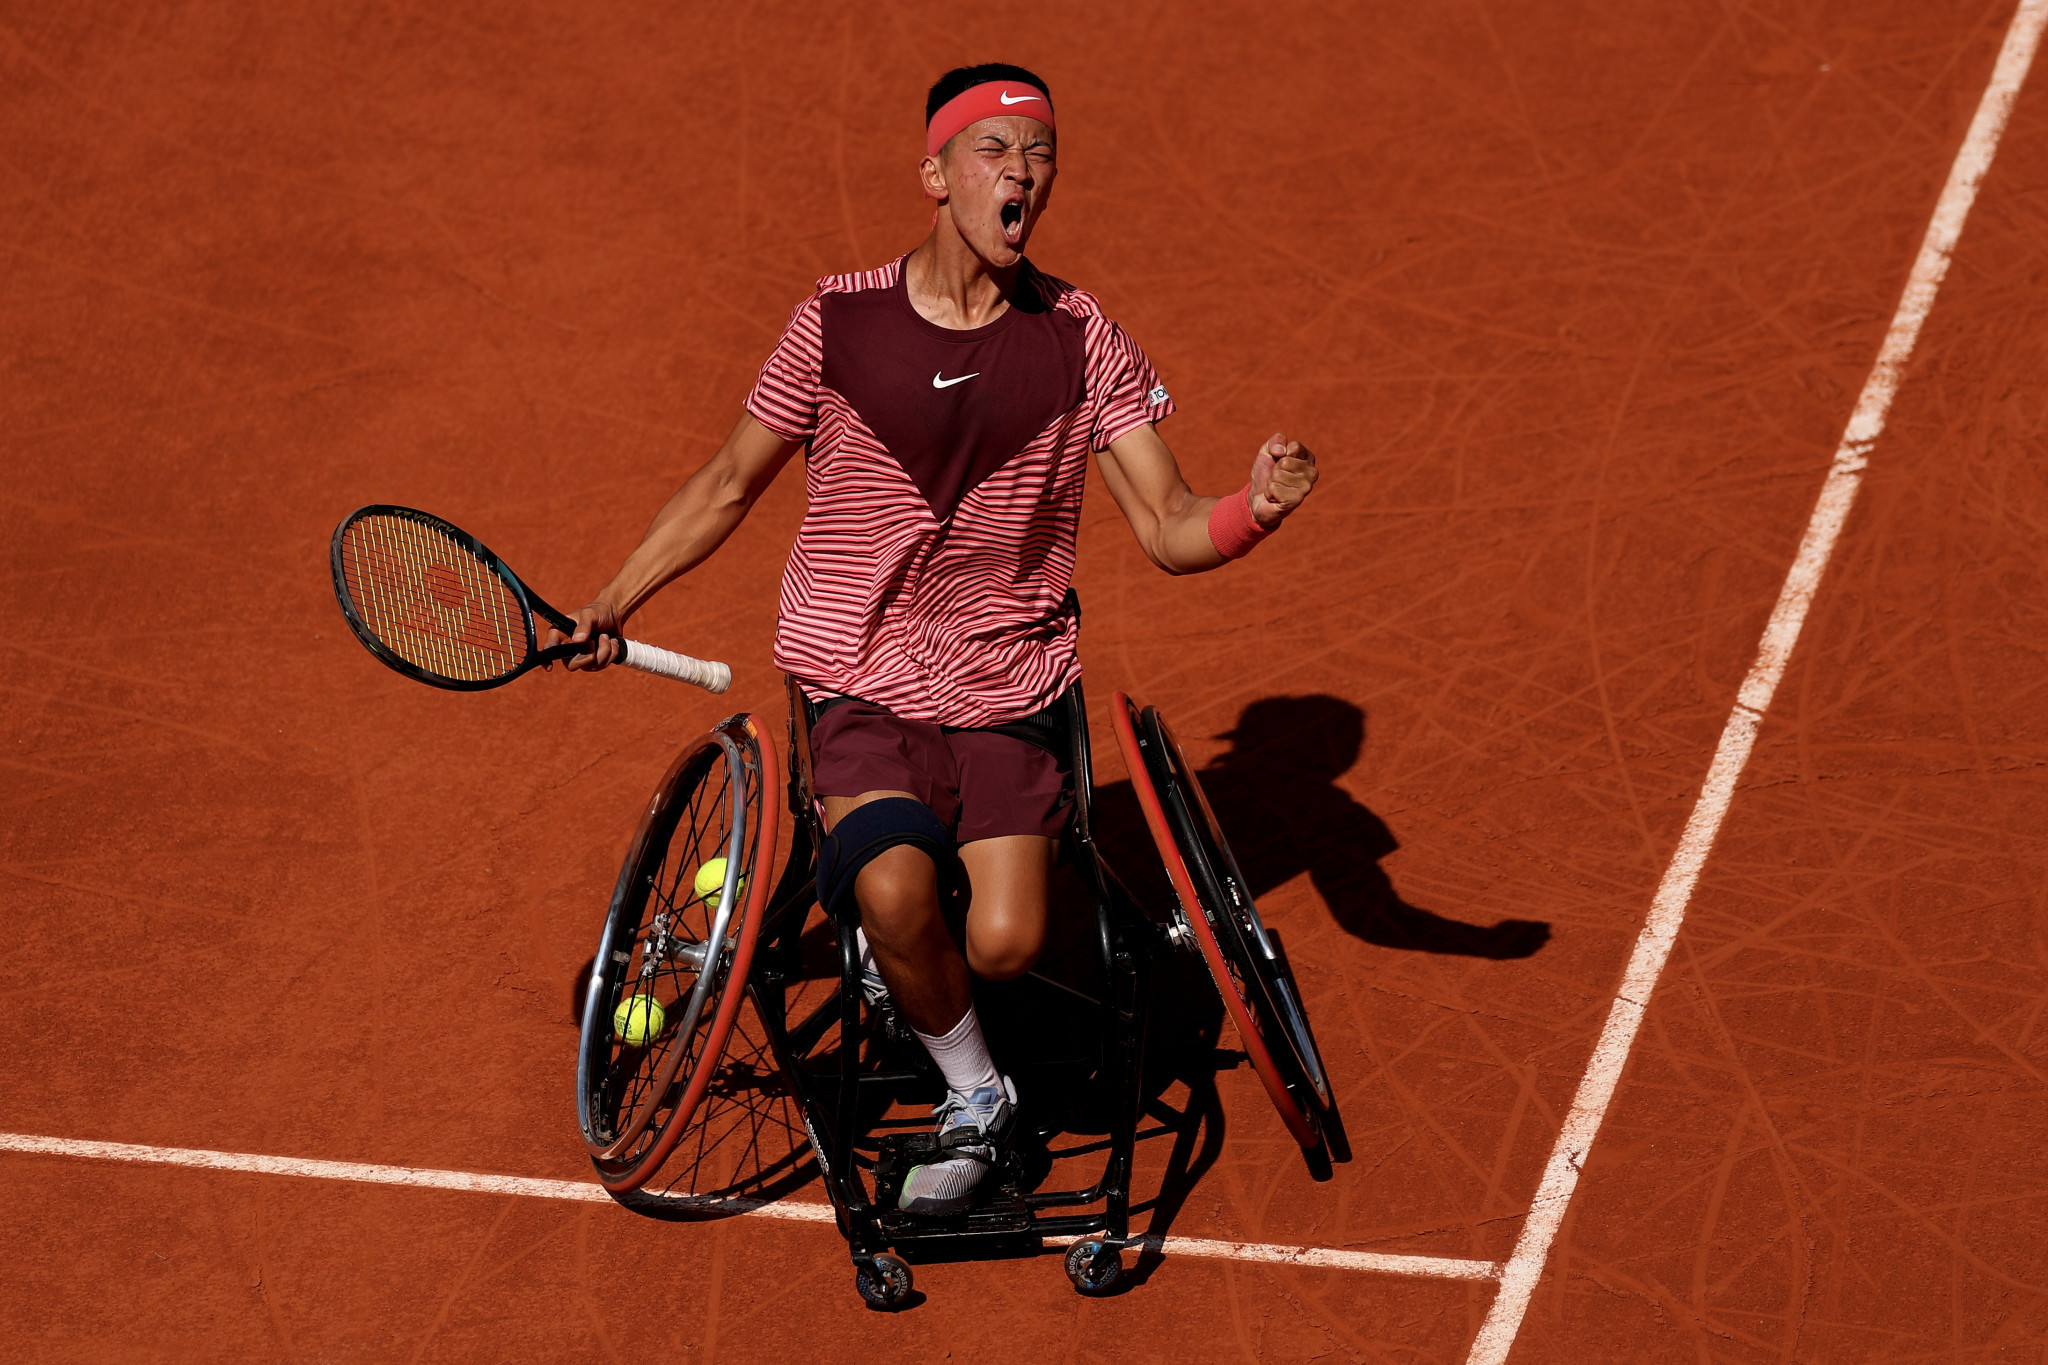 Teenager Oda topples Hewett to make wheelchair tennis history at French Open